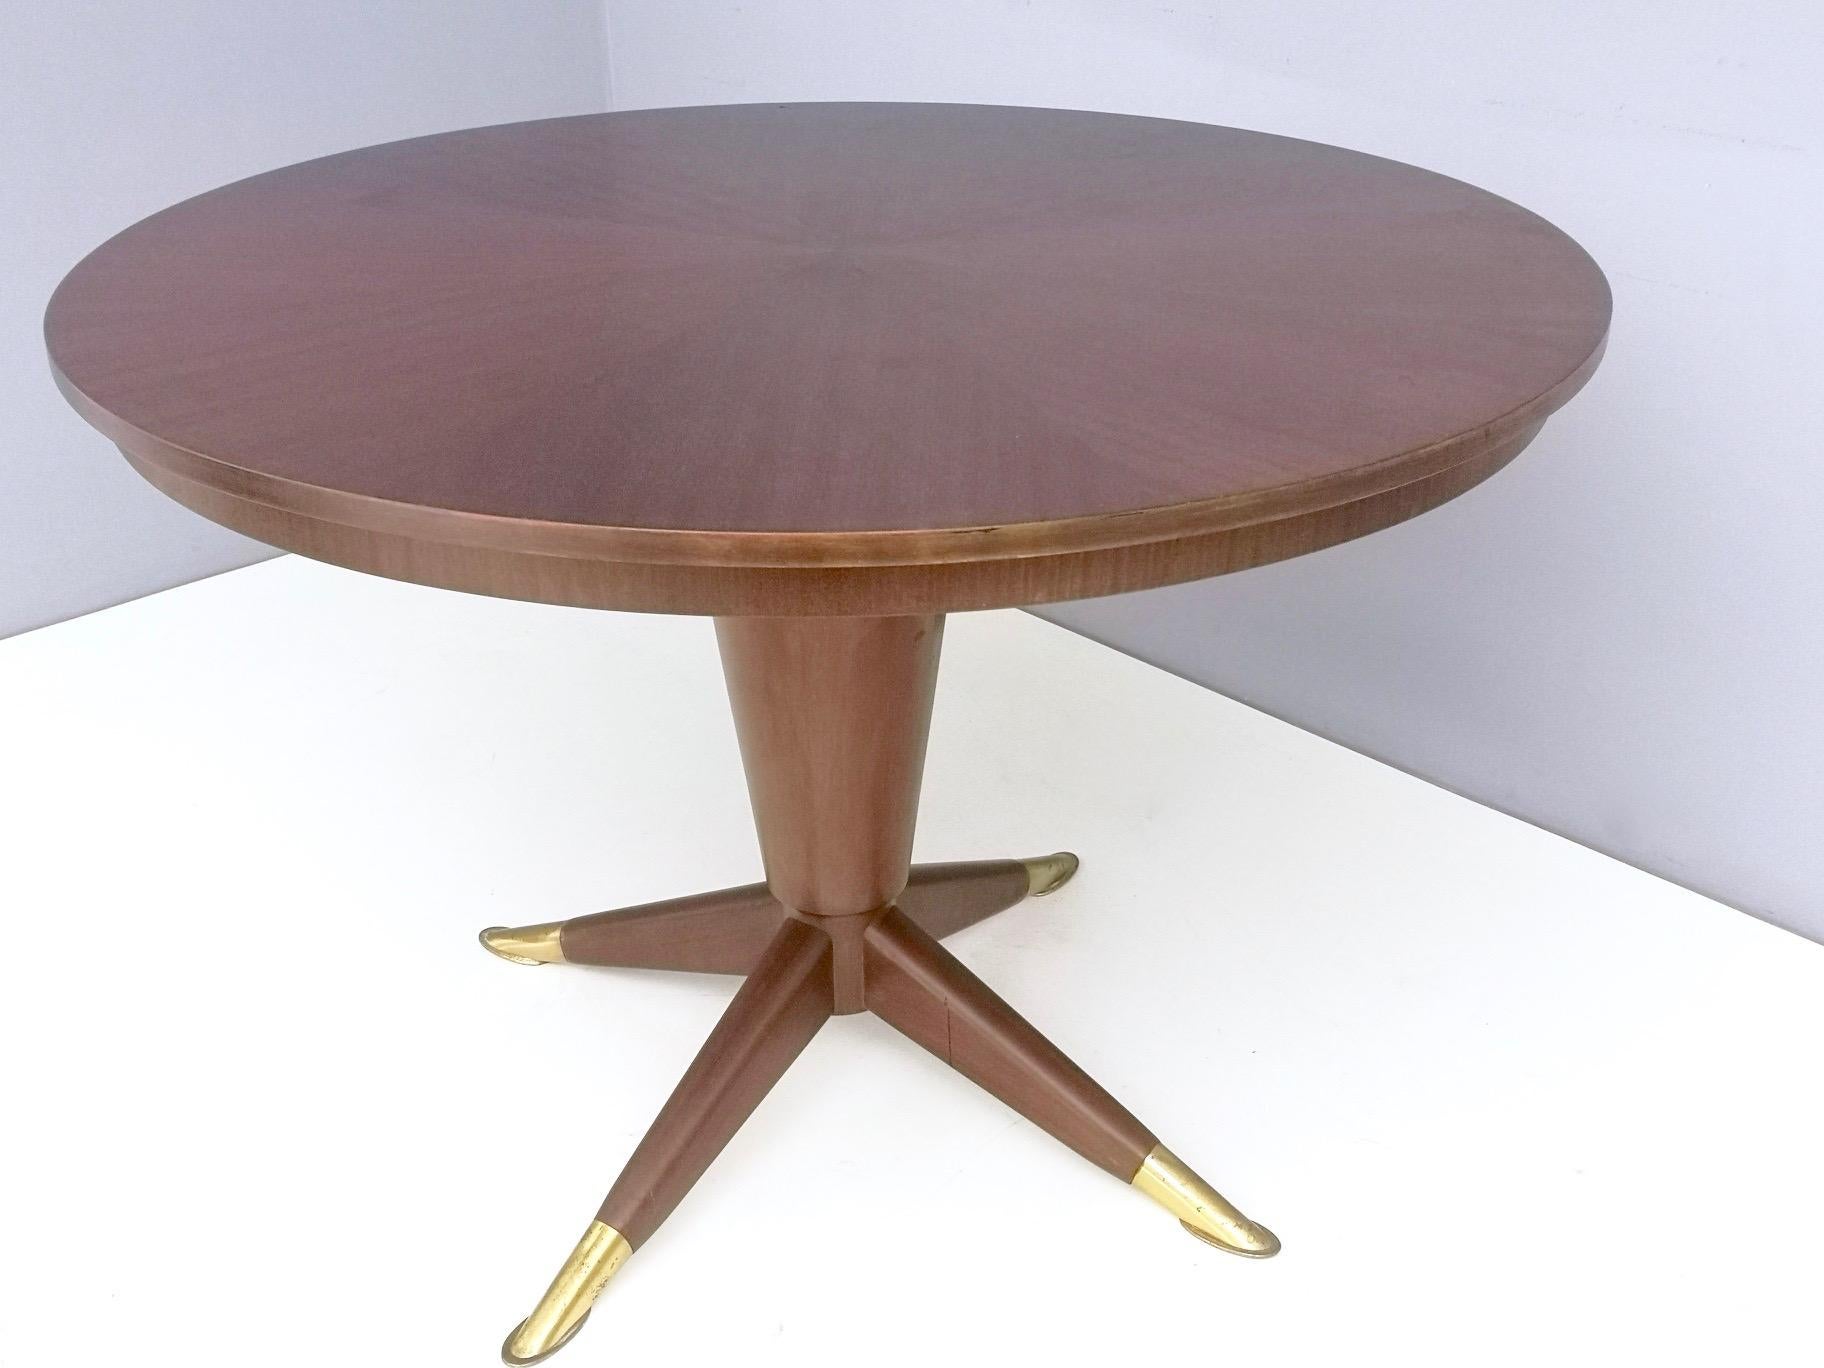 It's made in mahogany and features brass feet caps. 
It might show slight traces of use since it's vintage, but it can be considered as in excellent original condition and ready to become a piece in a home.

Diameter: 119.5 cm
Height: 81 cm